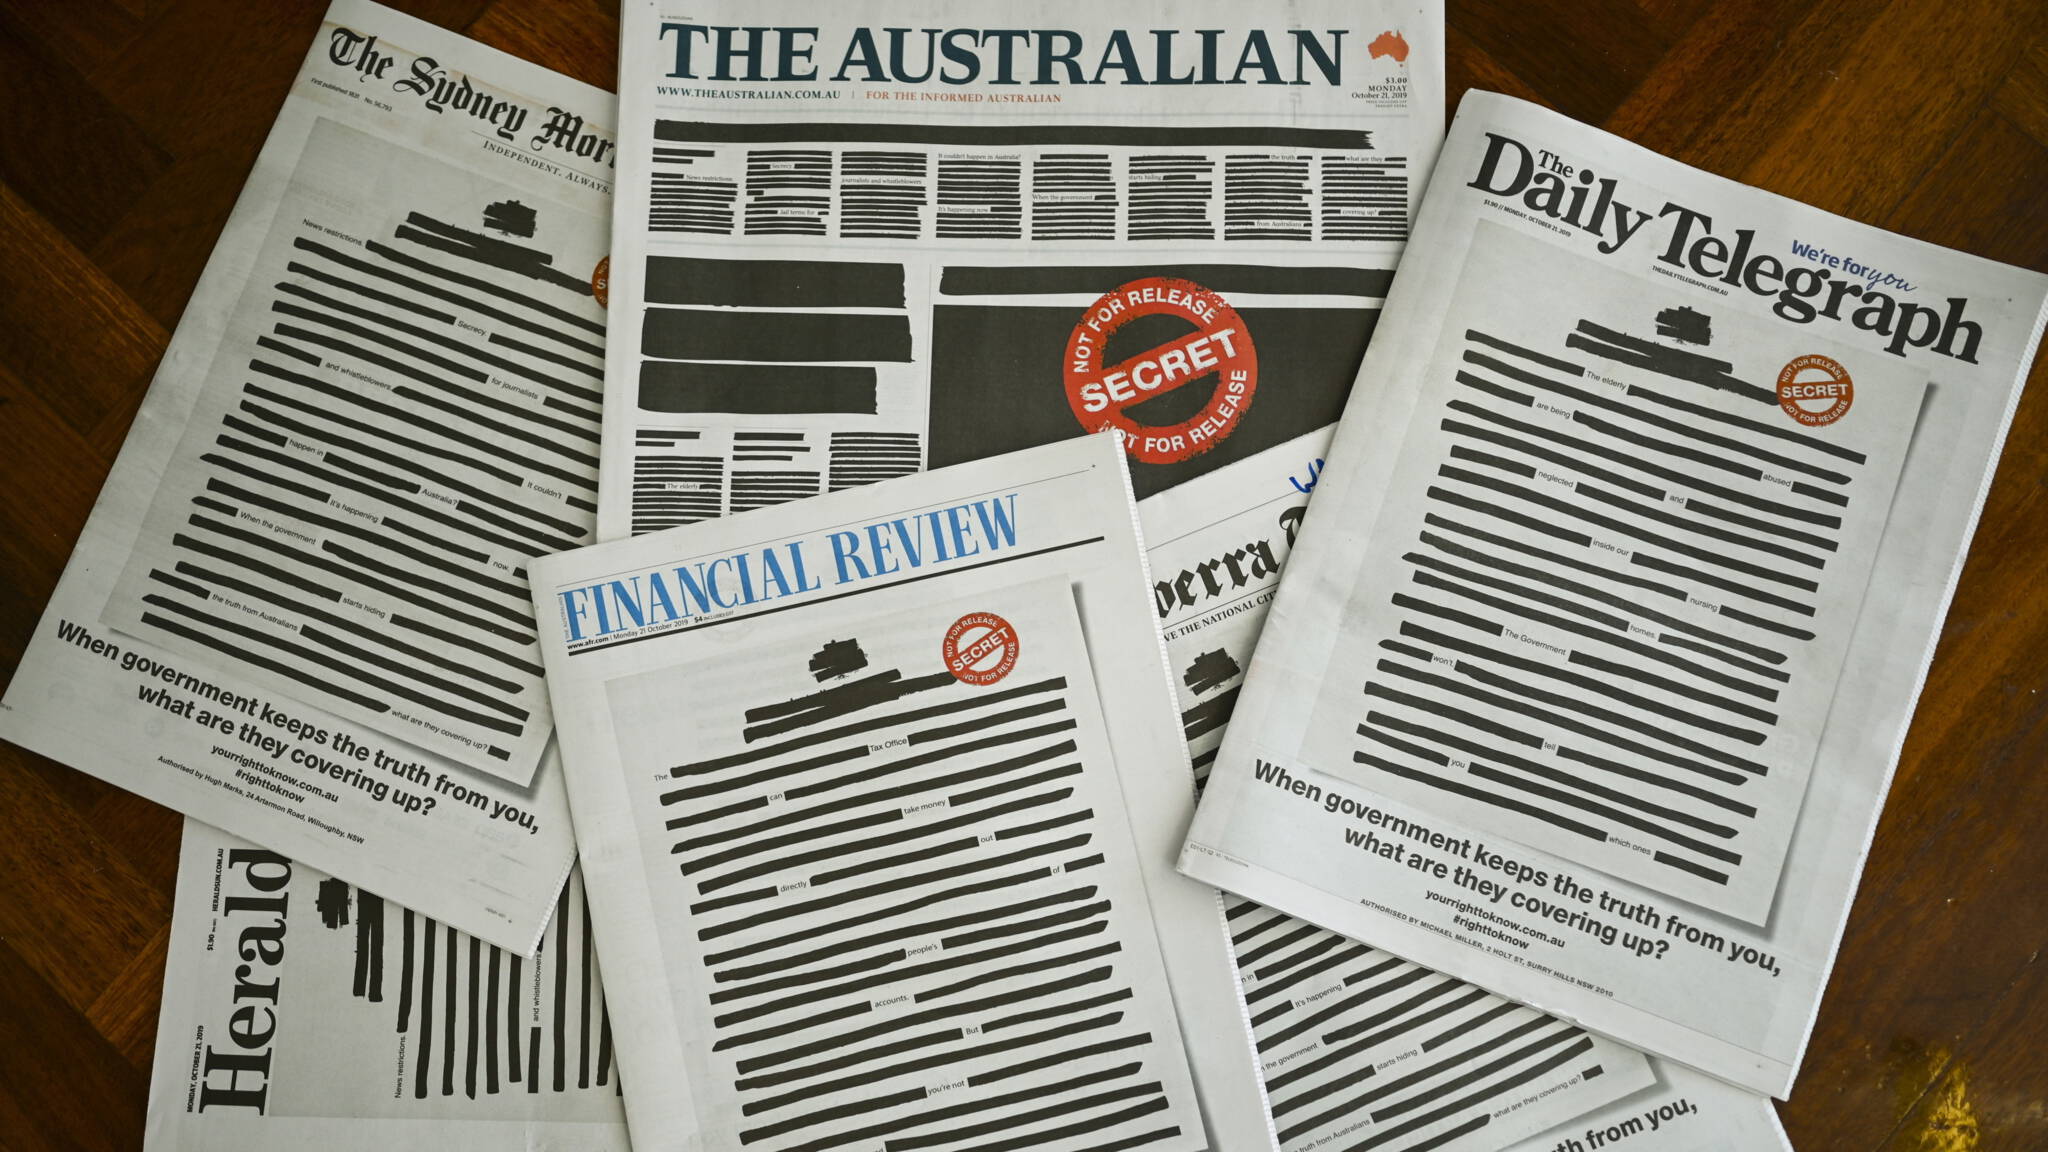 Australian newspapers' blackened front pages, in protest against government censorship, EPA photo